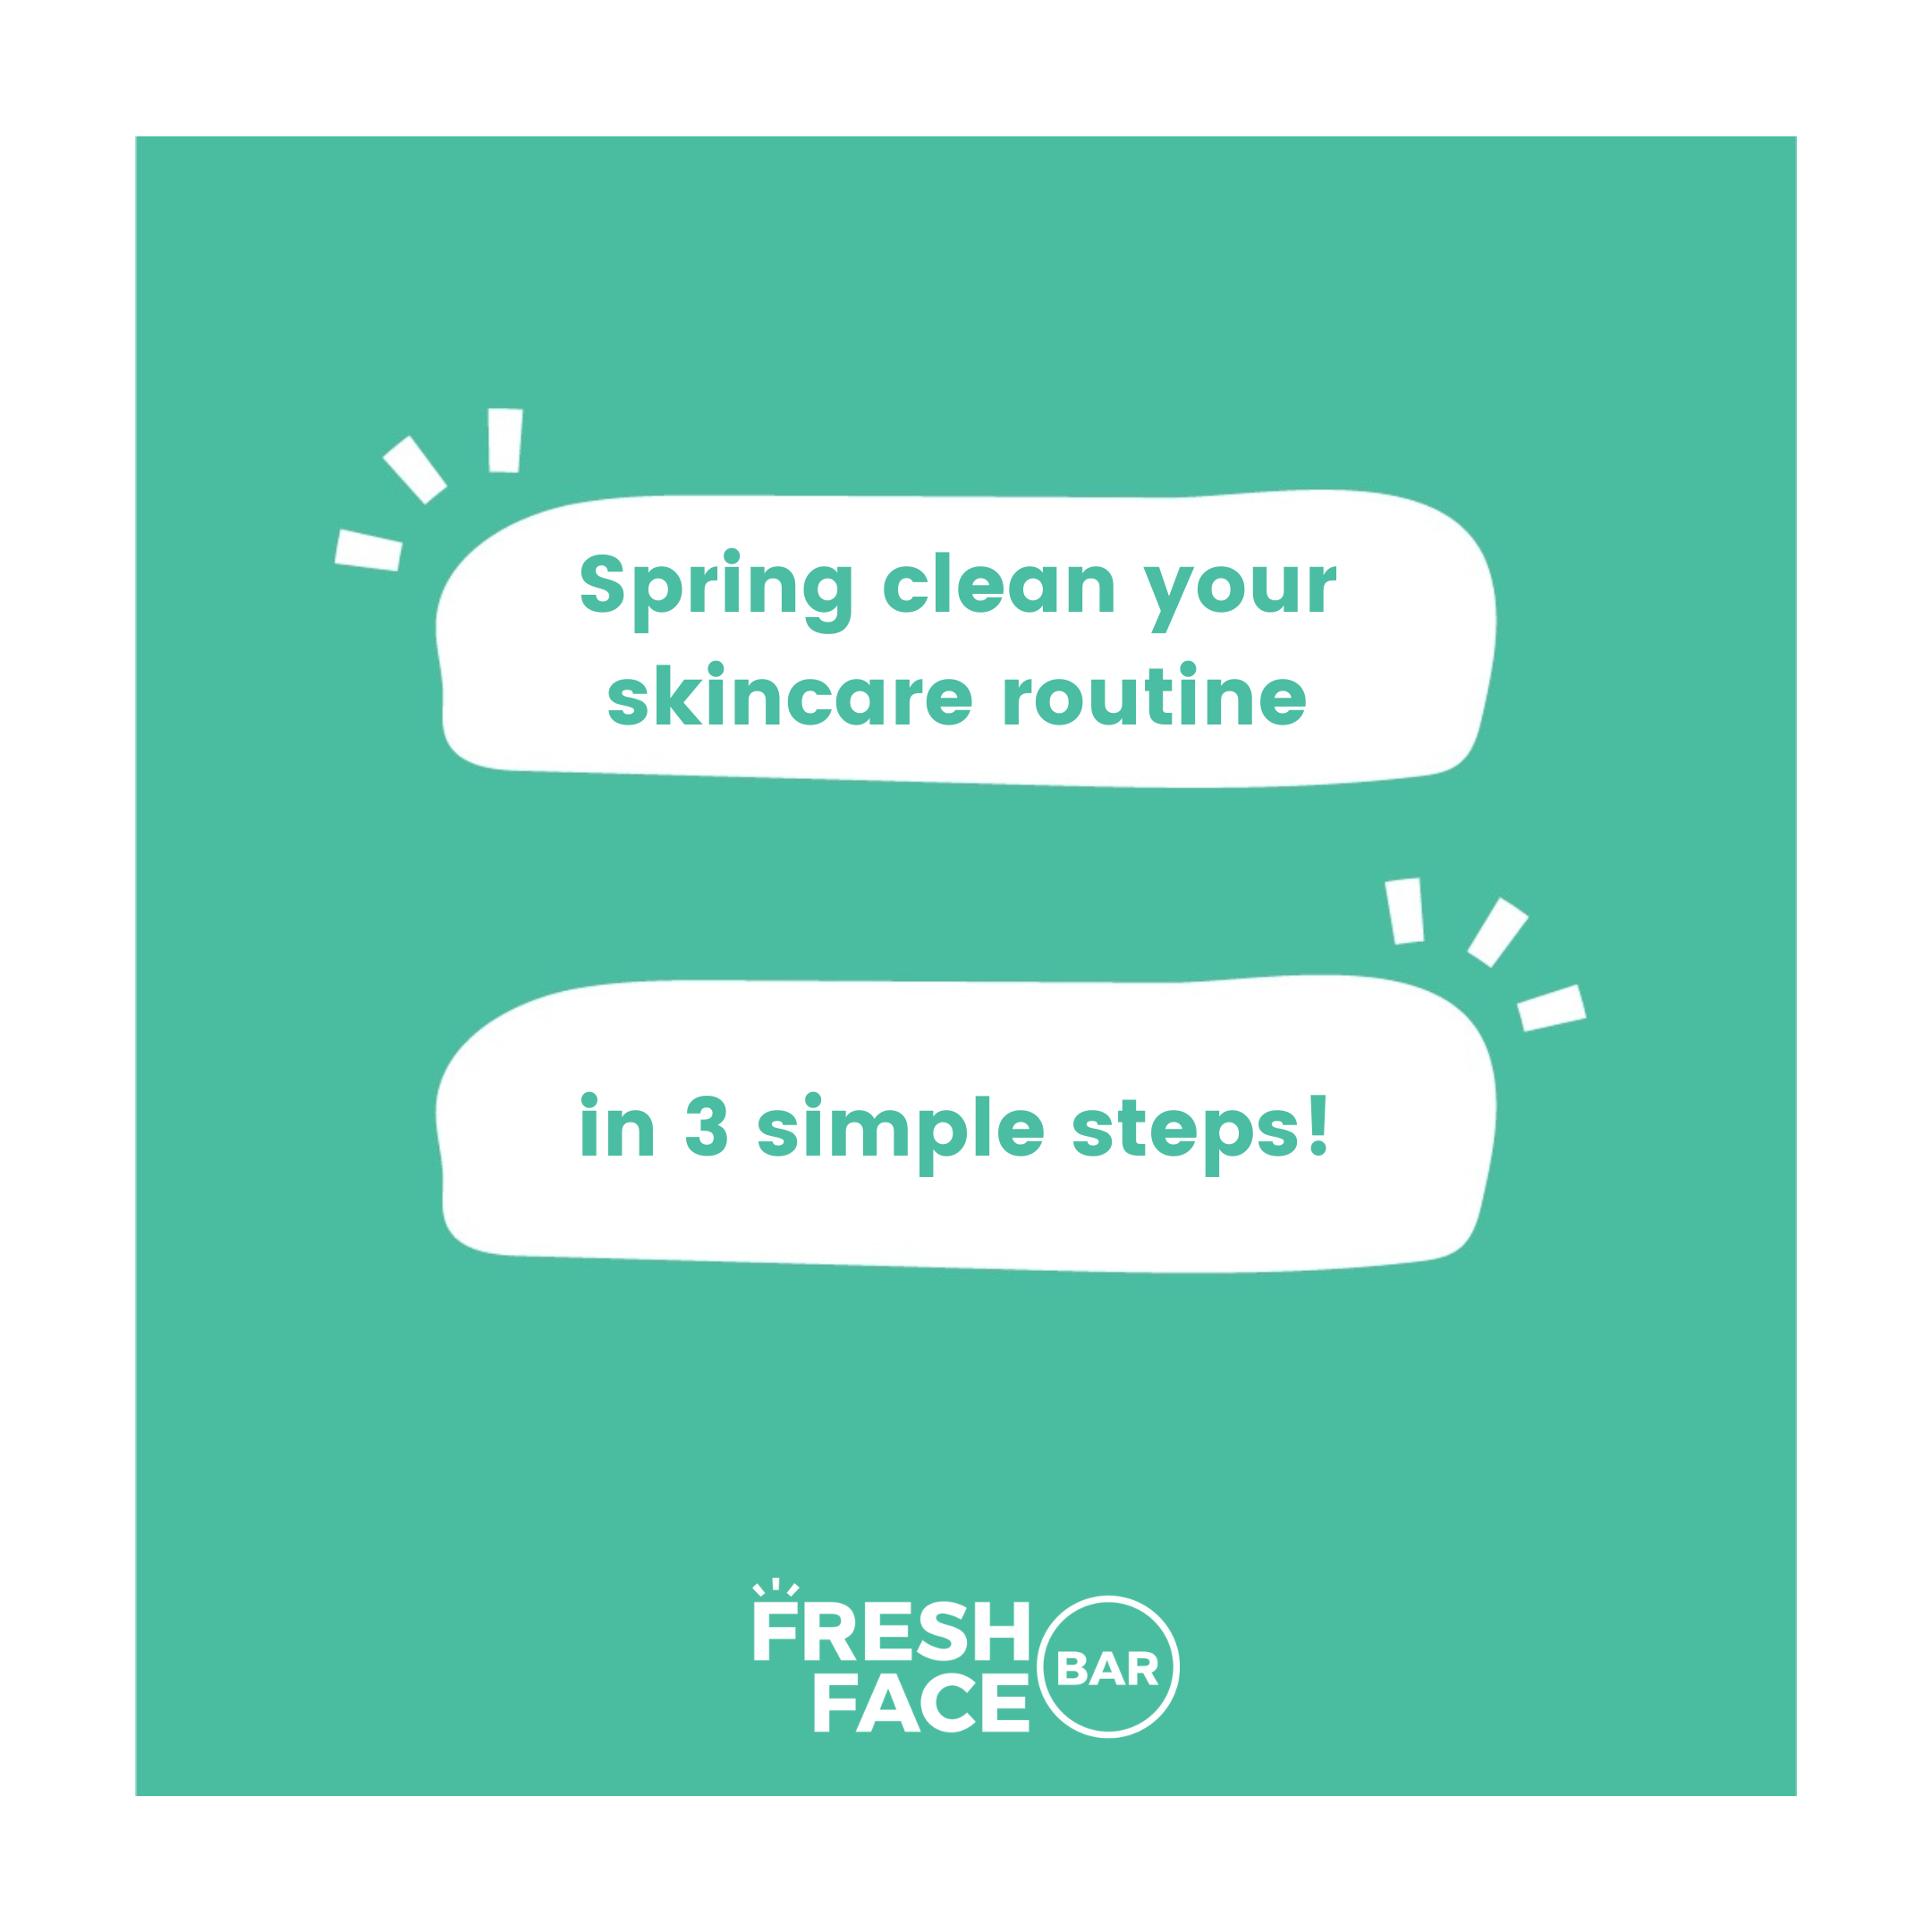 Spring Clean Your Skincare Routine in 3 Simple Steps!